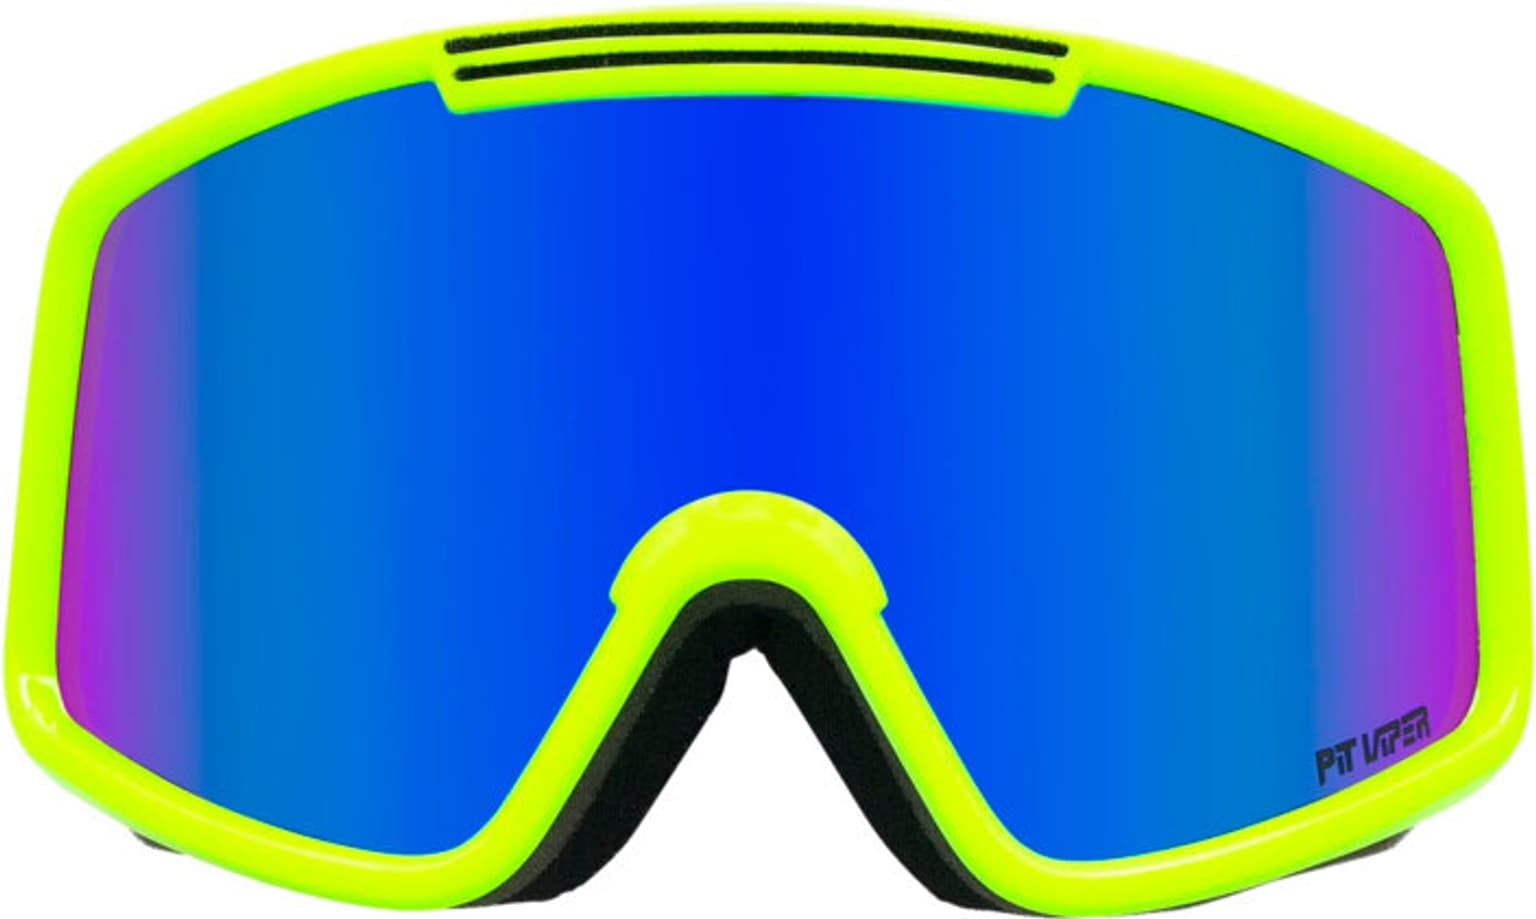 Pit Viper Pit Viper The French Fry Goggle Large The Sludge Skibrille 2